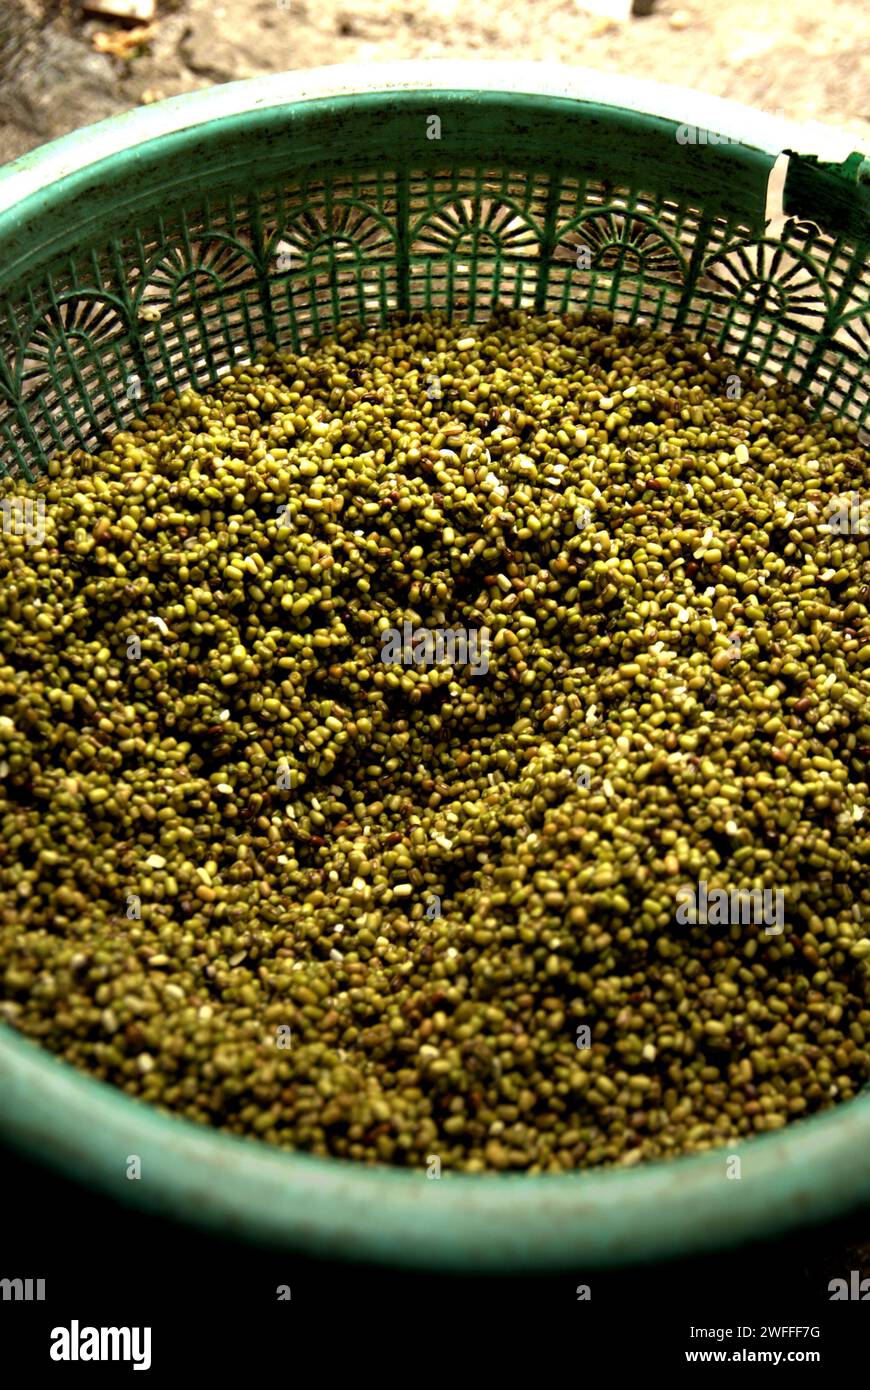 Mung beans (Vigna radiata L.) at a bean sprouts farm in Jakarta, Indonesia. Mung bean sprouts are a culinary vegetable that, because of its adaptability and nutritious benefits, have since ancient times been widely grown and consumed in East and Southeast Asia, according to a team of researchers led by Mohammad Zakerin Abedin (Department of Botany, Microbiology Laboratory, Jahangirnagar University, Dhaka) in a 2022 paper published on South Asian Journal of Research in Microbiology. Mung beans can be easily sprouted by putting them in the shade and watering them until germinated, with... Stock Photo